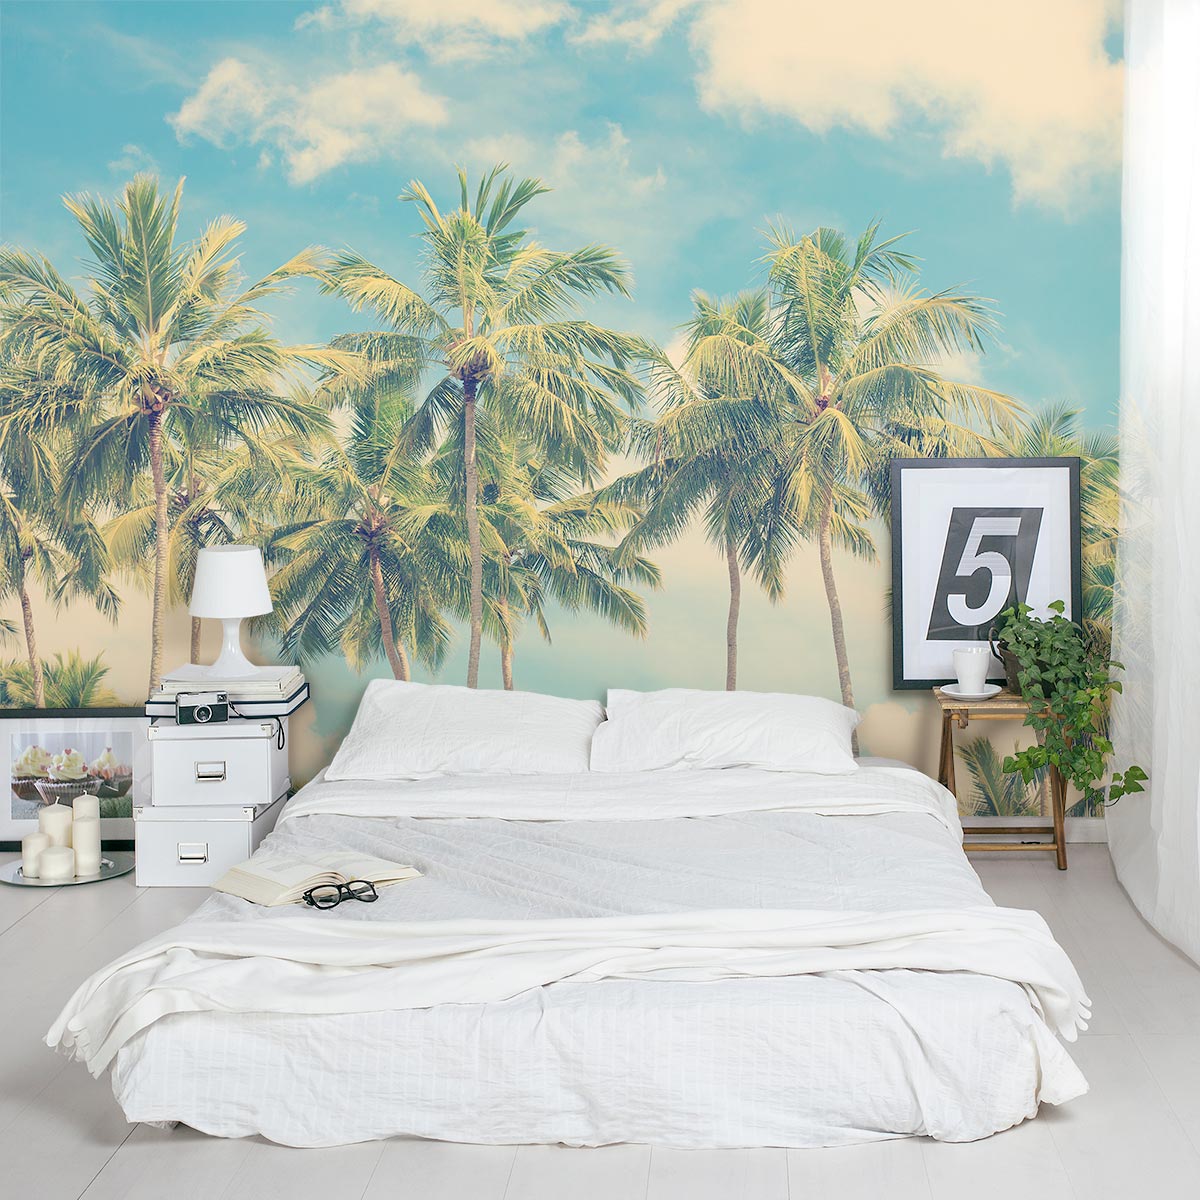 Vintage Palm Tree Wall Mural | Vintage Palm Wall Decal